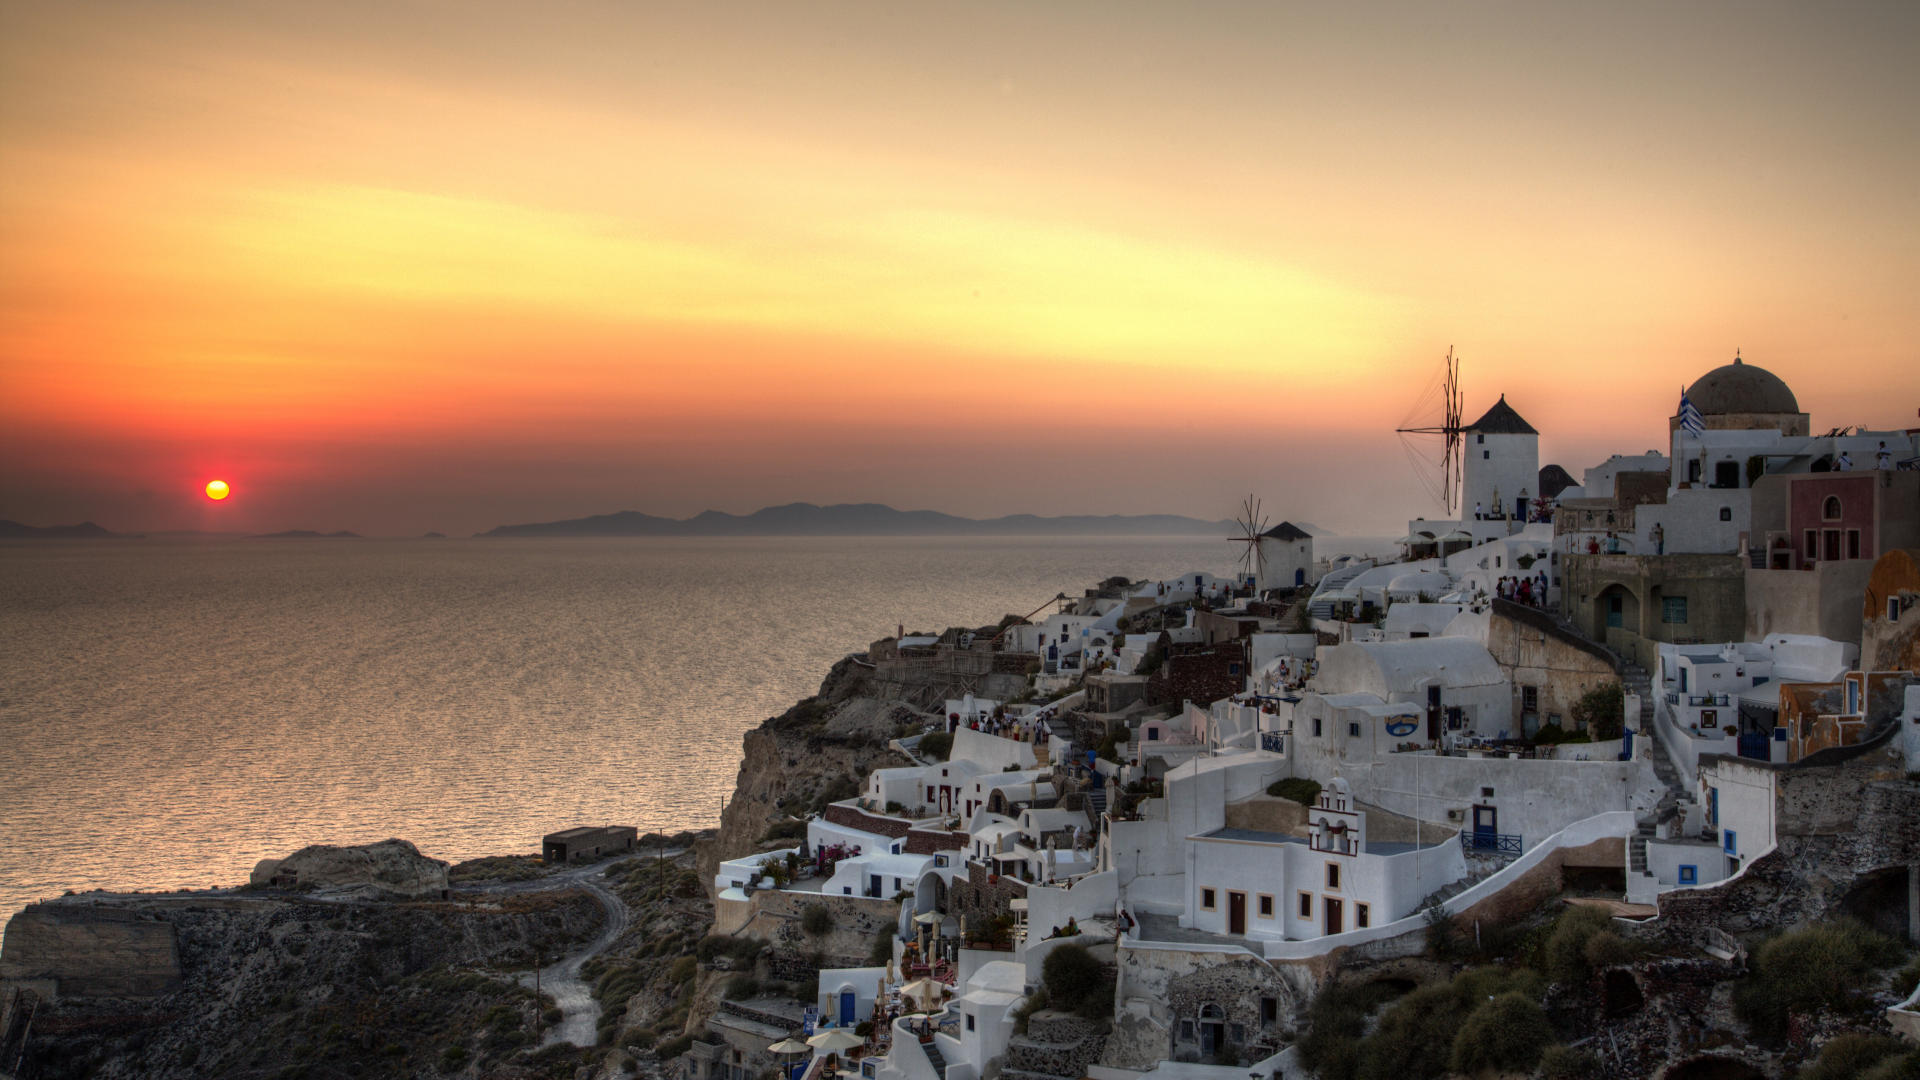  provide you to Free HD WallpapersGet Gorgeous Hd Wallpapers Greece